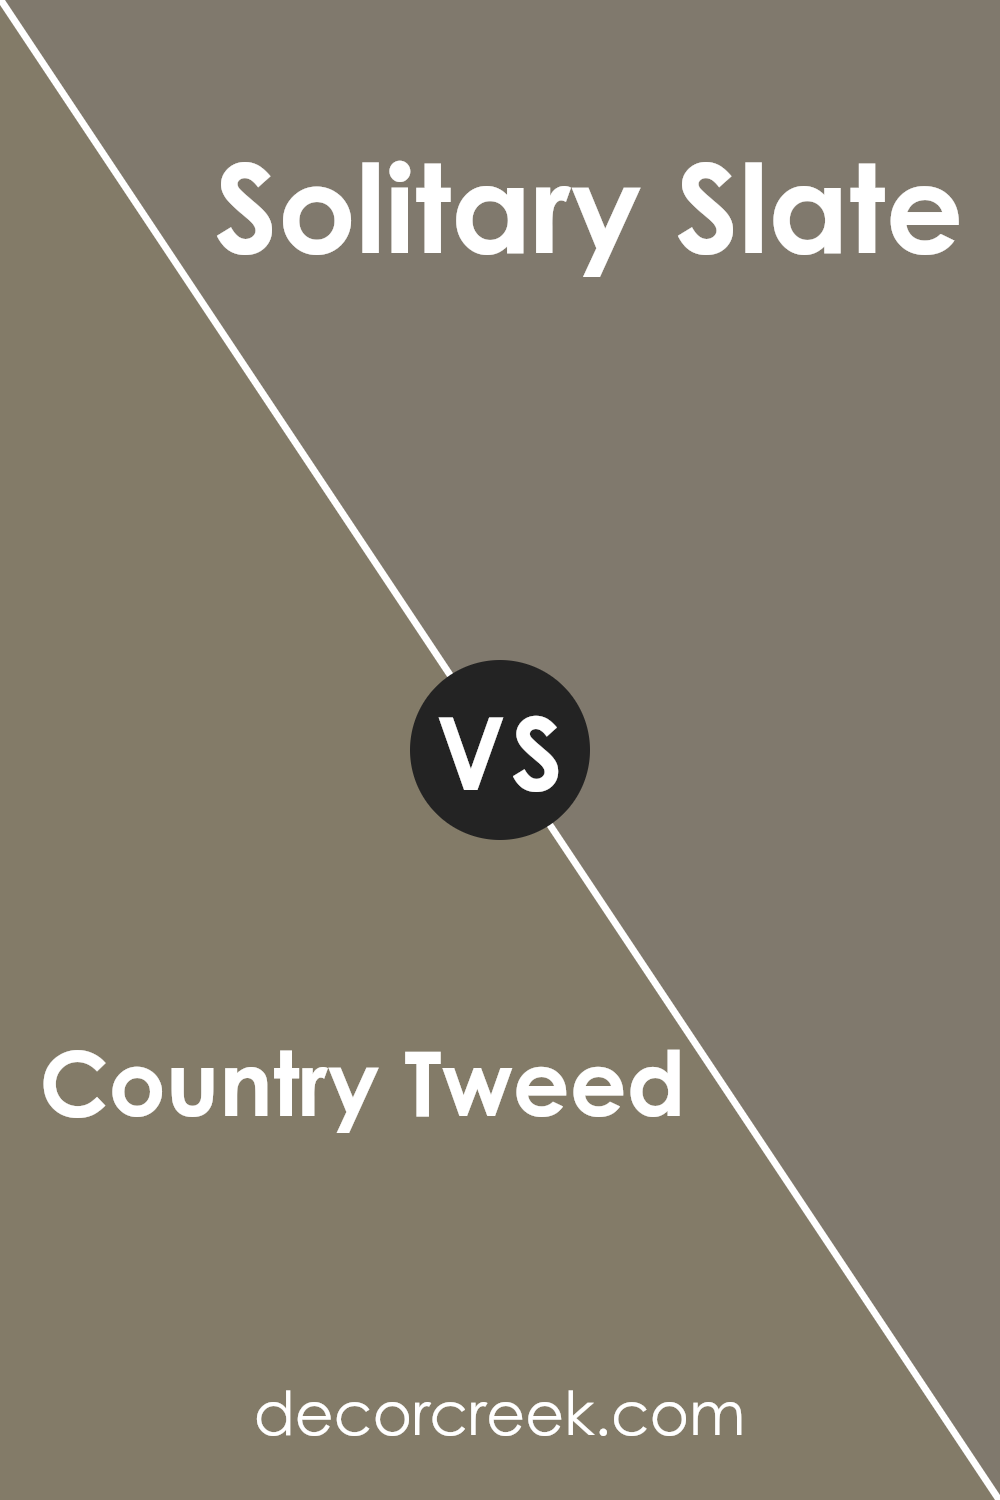 country_tweed_sw_9519_vs_solitary_slate_sw_9598